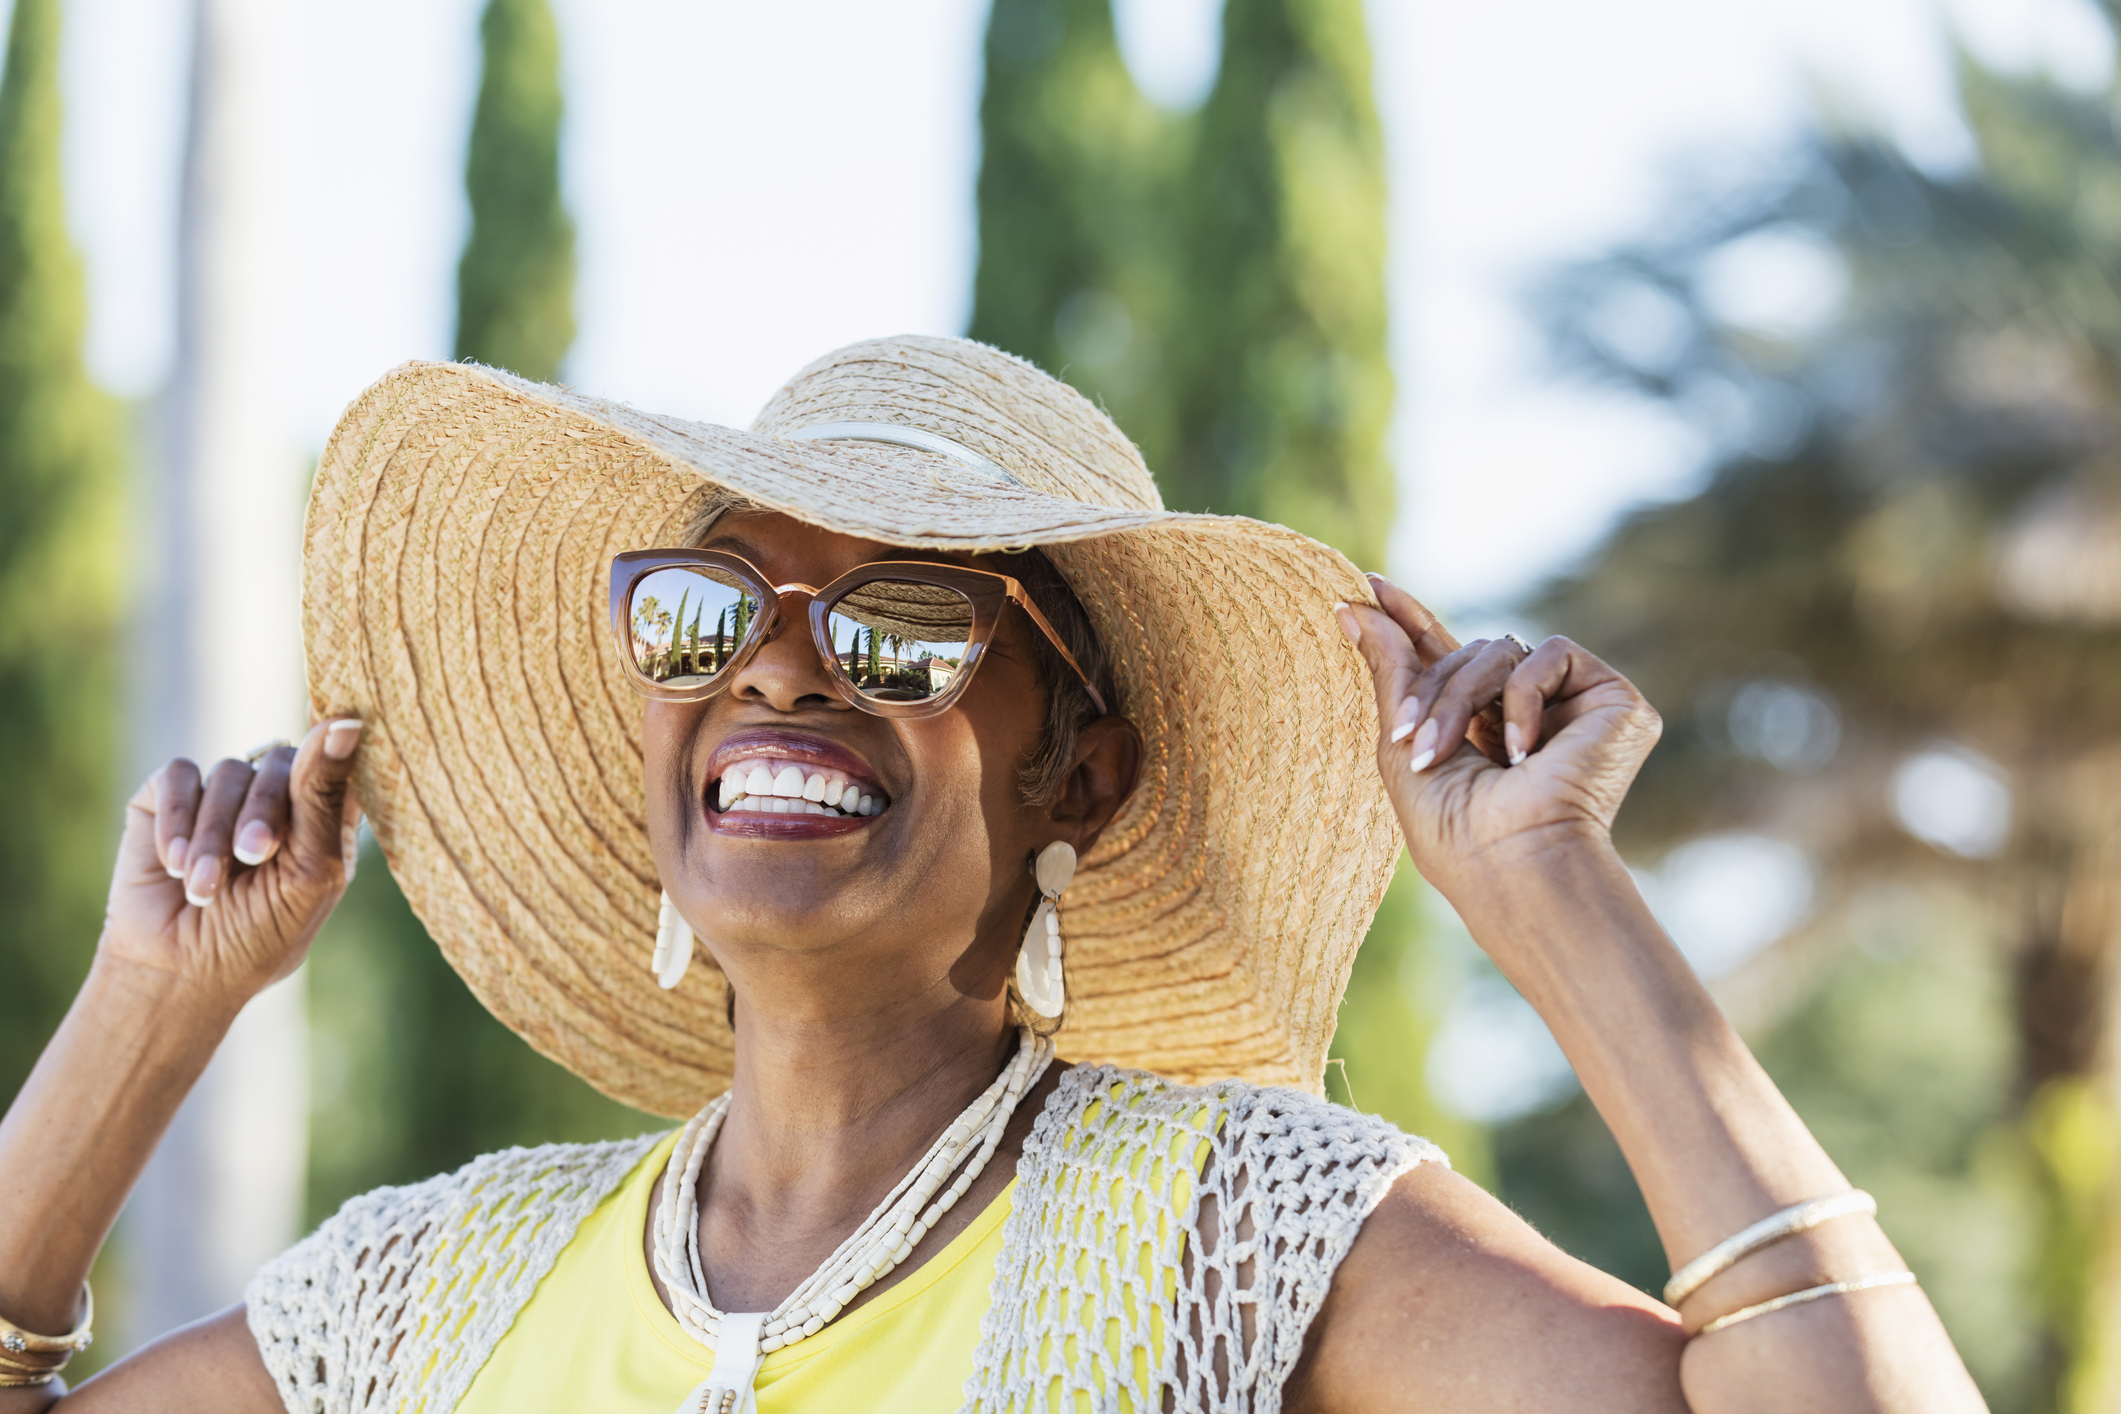 Carle Eye Department offers six tips to protect your eyes from the sun.